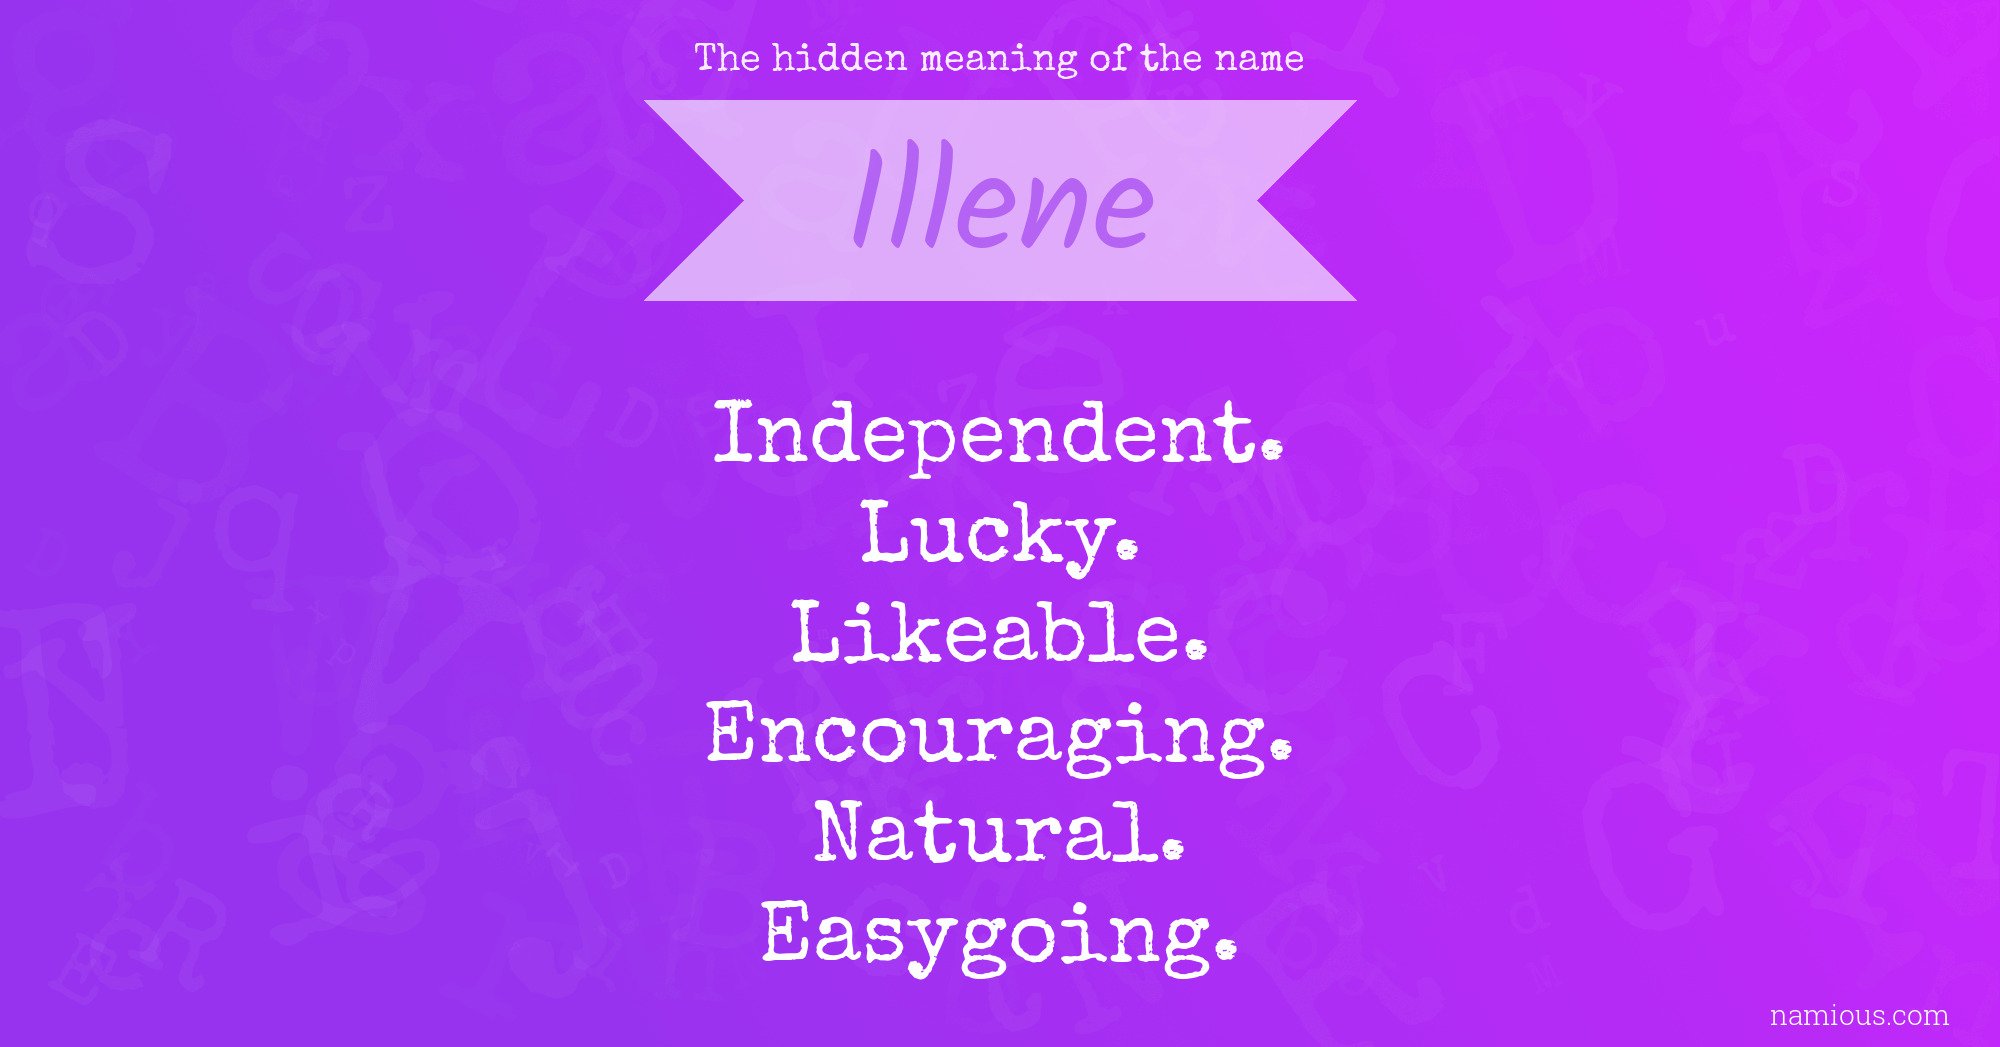 The hidden meaning of the name Illene